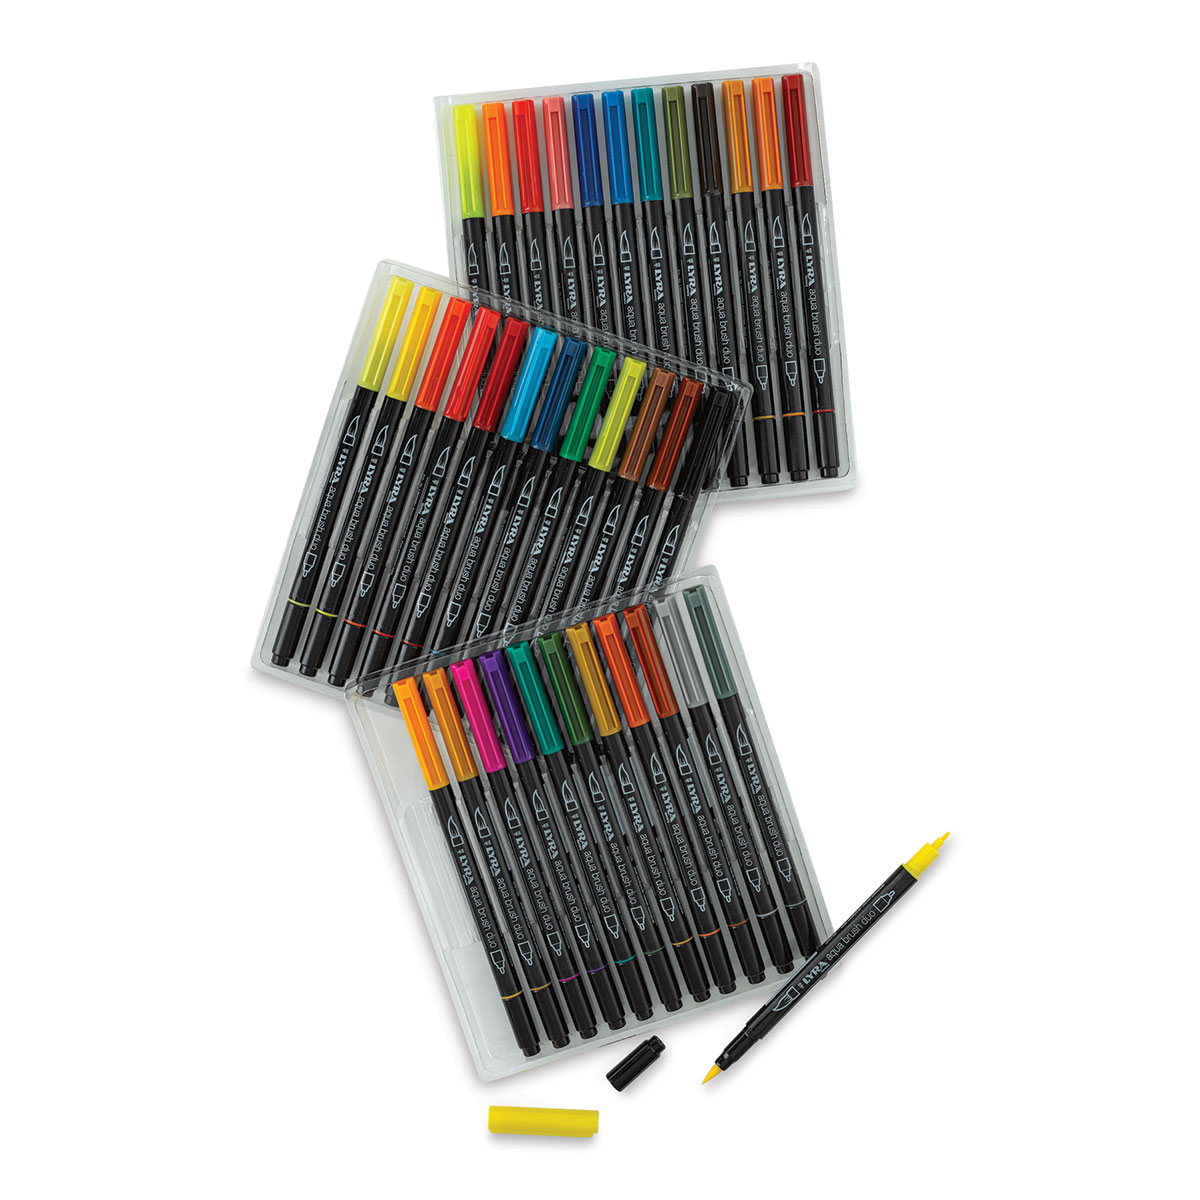  Lyra Aqua Brush Duo Brush Markers - Set of 24 Water-Based  Brush Pens for Artists of All Ages - Dual Tip Markers for Fine Details and  Wide Strokes - Durable